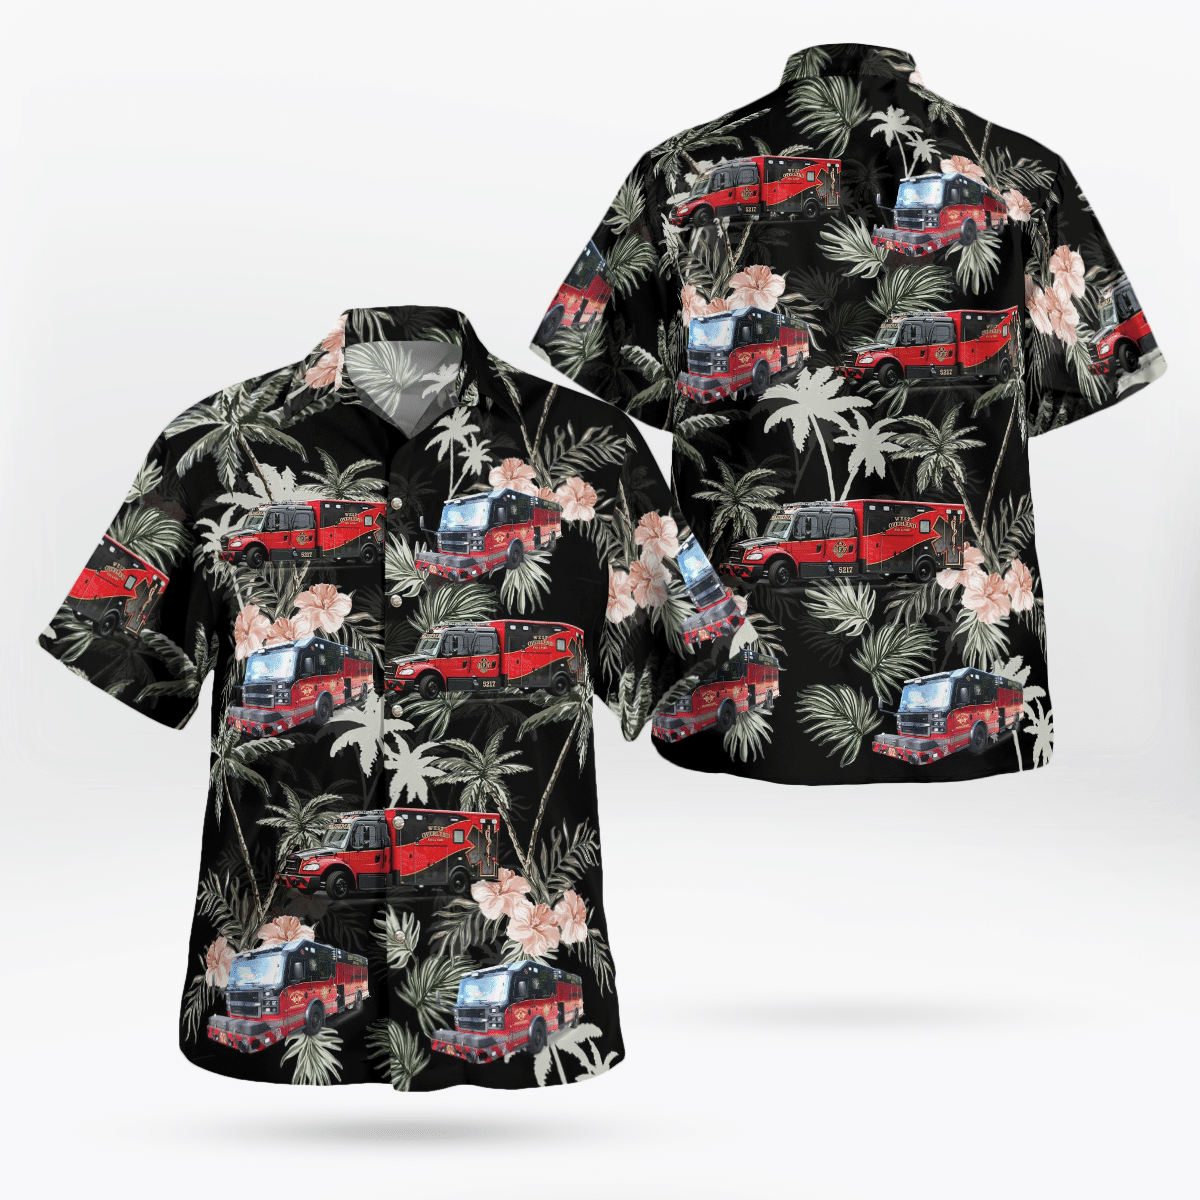 If you are in need of a new summertime look, pick up this Hawaiian shirt 48